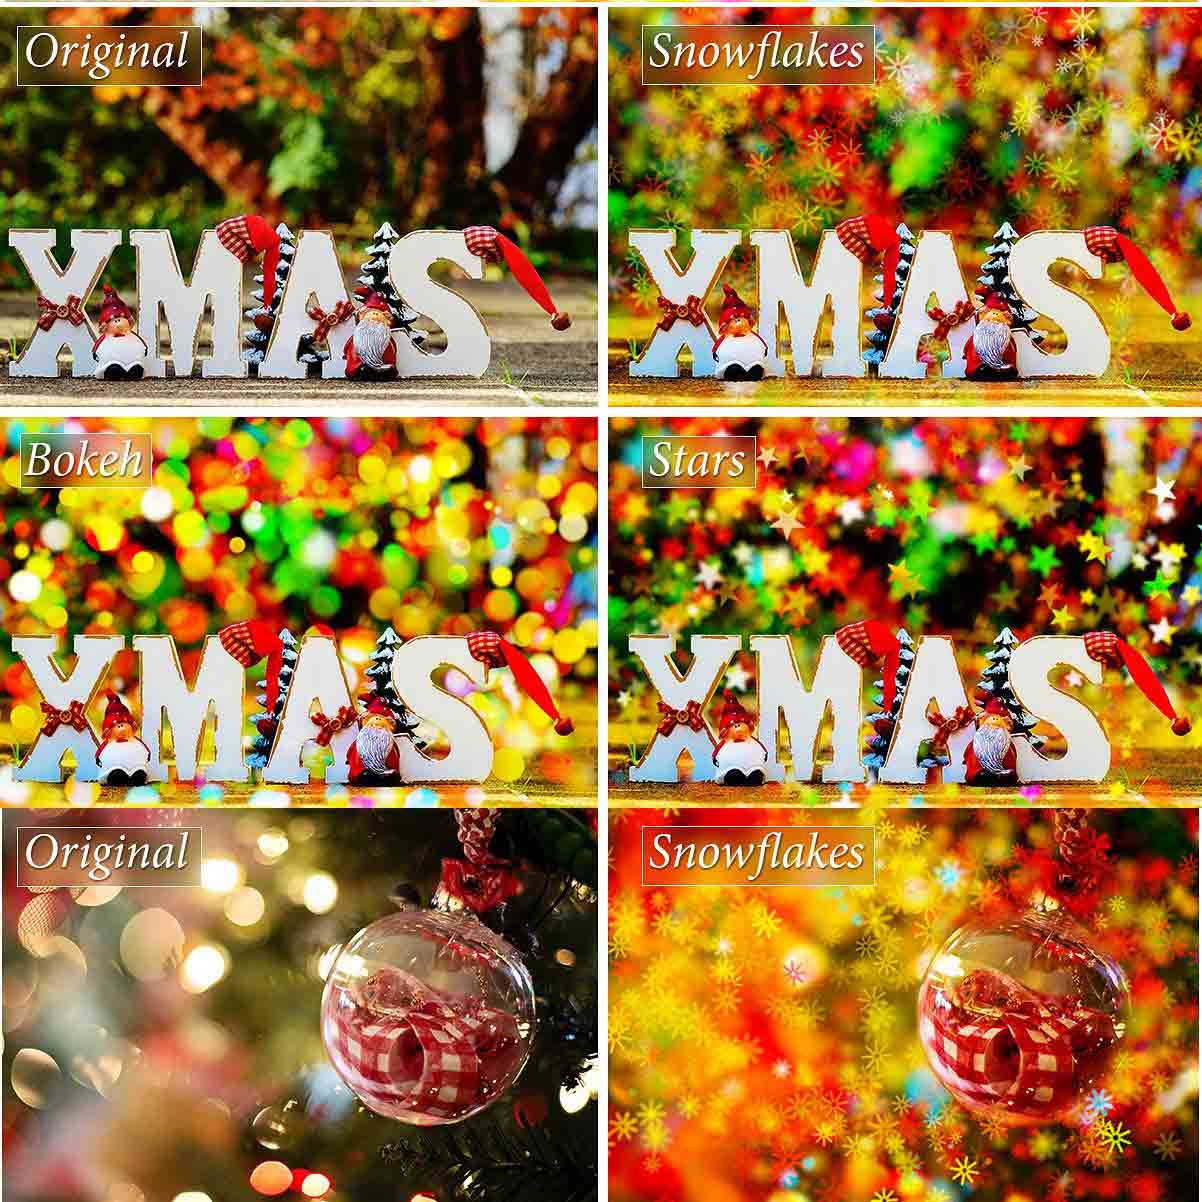 Christmas Deal: Overlays, Patterns, Brushes, Actions cover image.